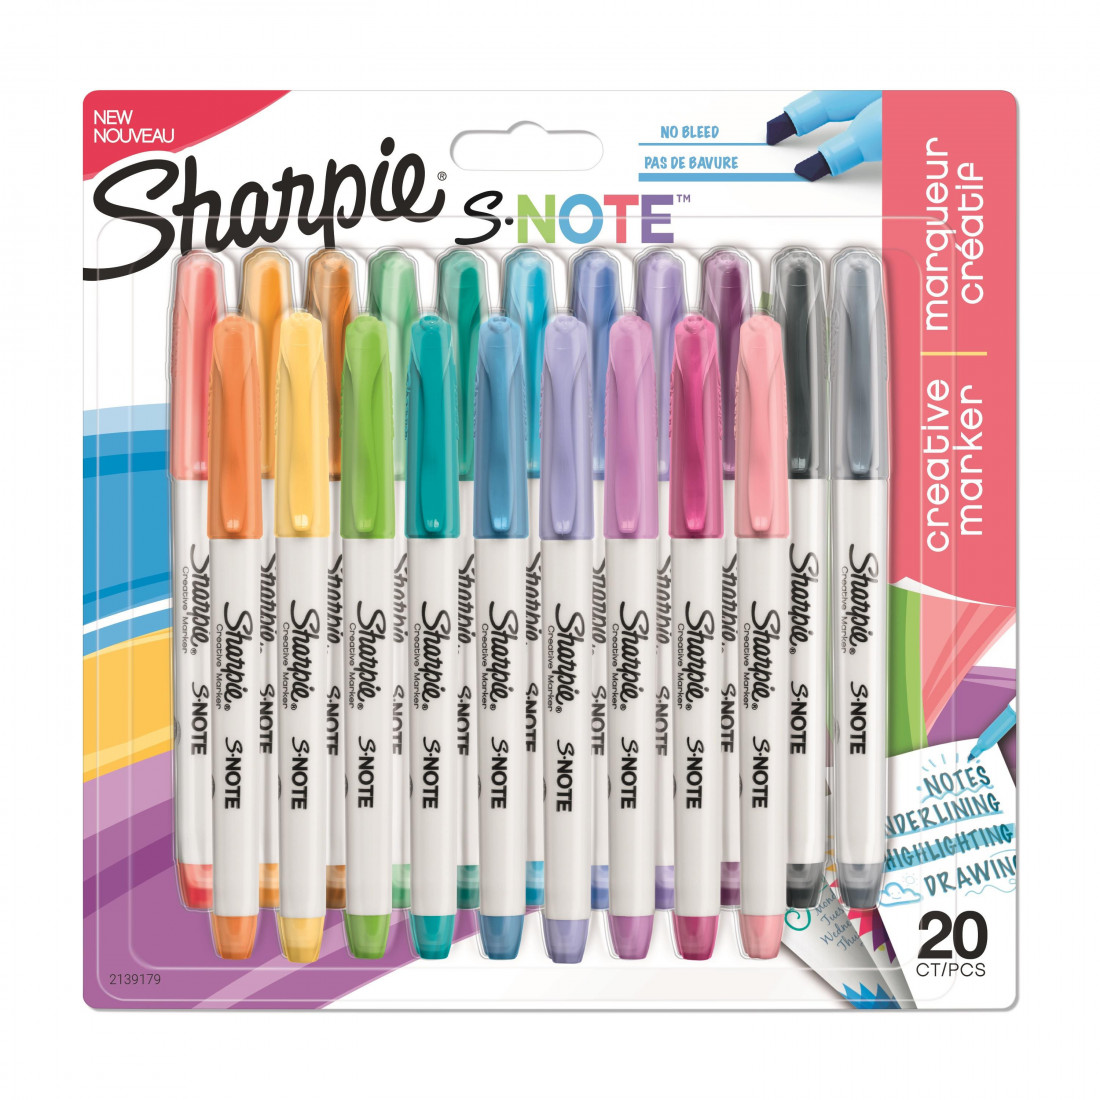 Sharpie S.NOTE creative markers 20 pcs